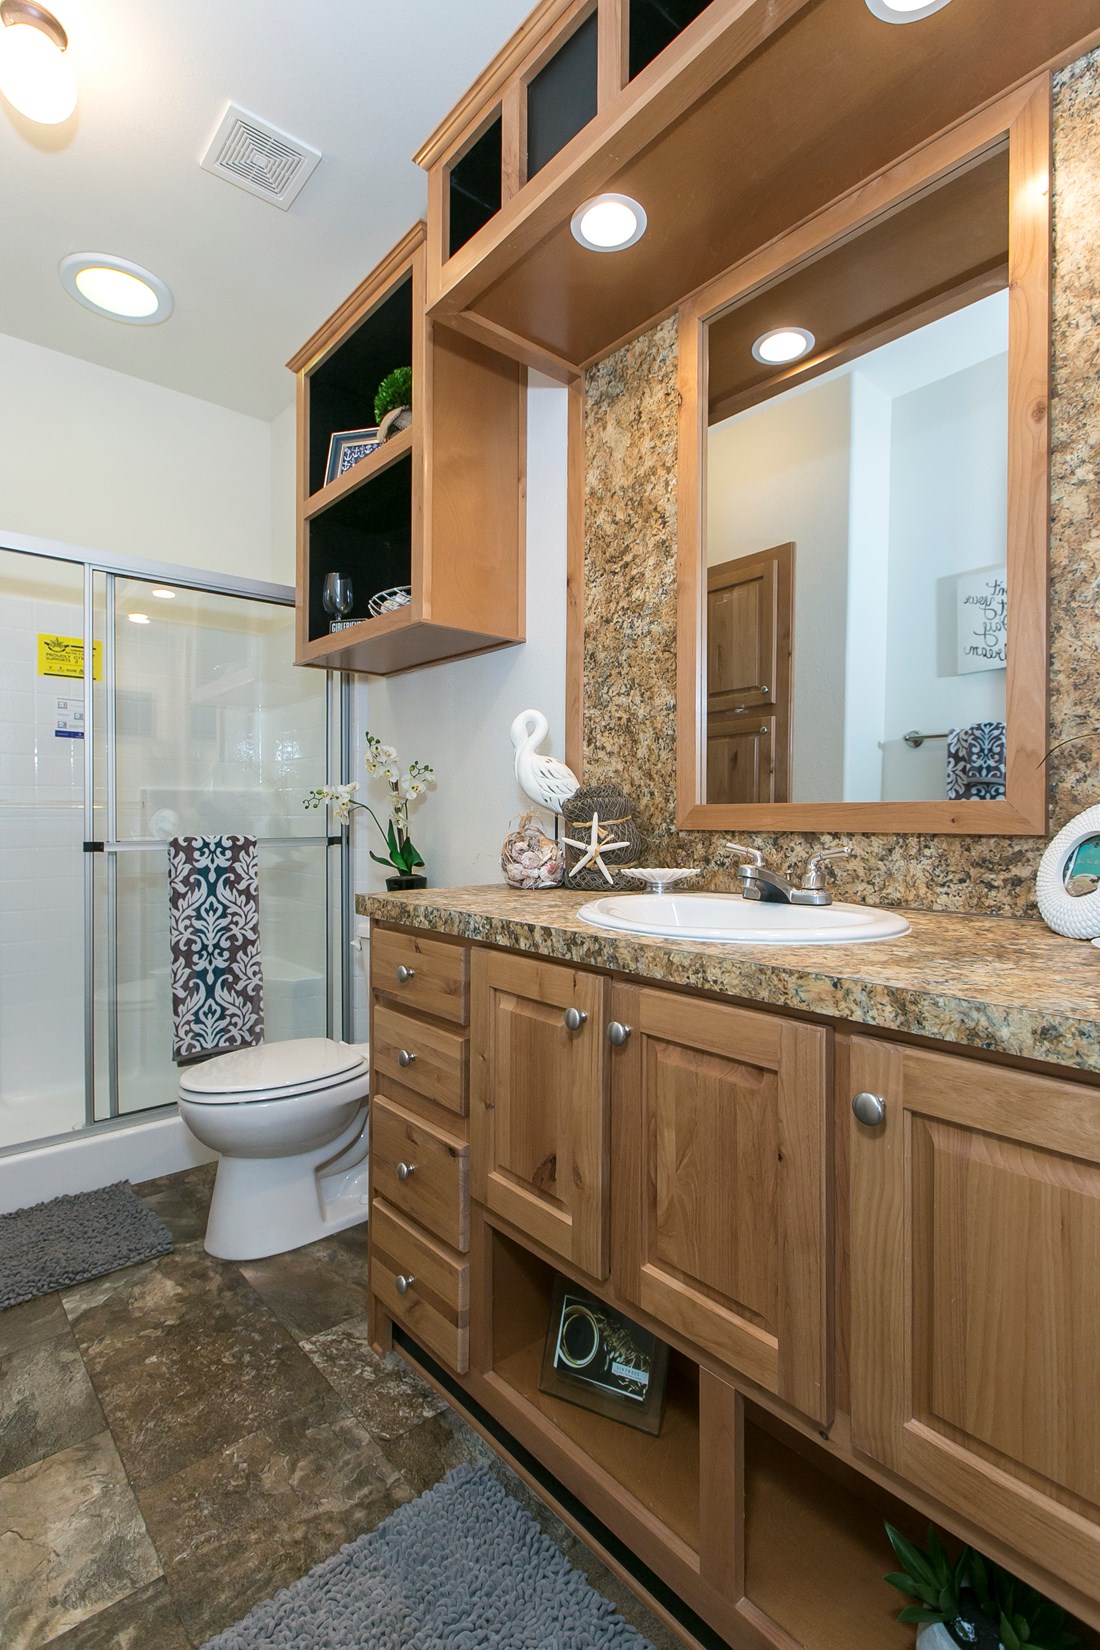 The ING382F REDWOOD II   (FULL) GW Primary Bathroom. This Manufactured Mobile Home features 2 bedrooms and 2 baths.